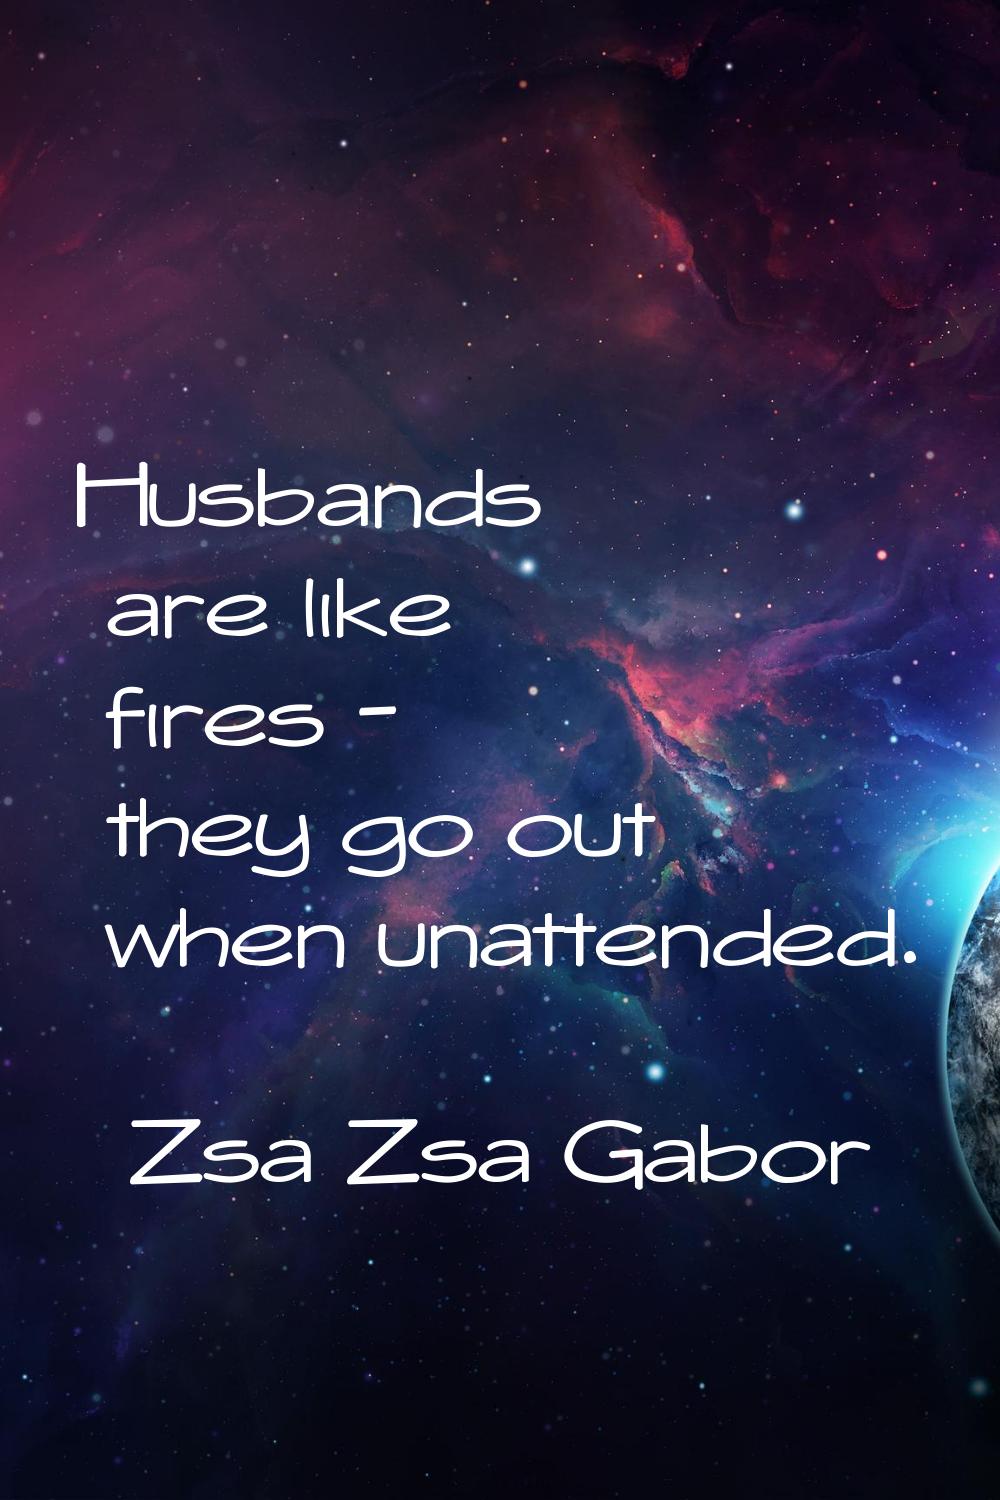 Husbands are like fires - they go out when unattended.